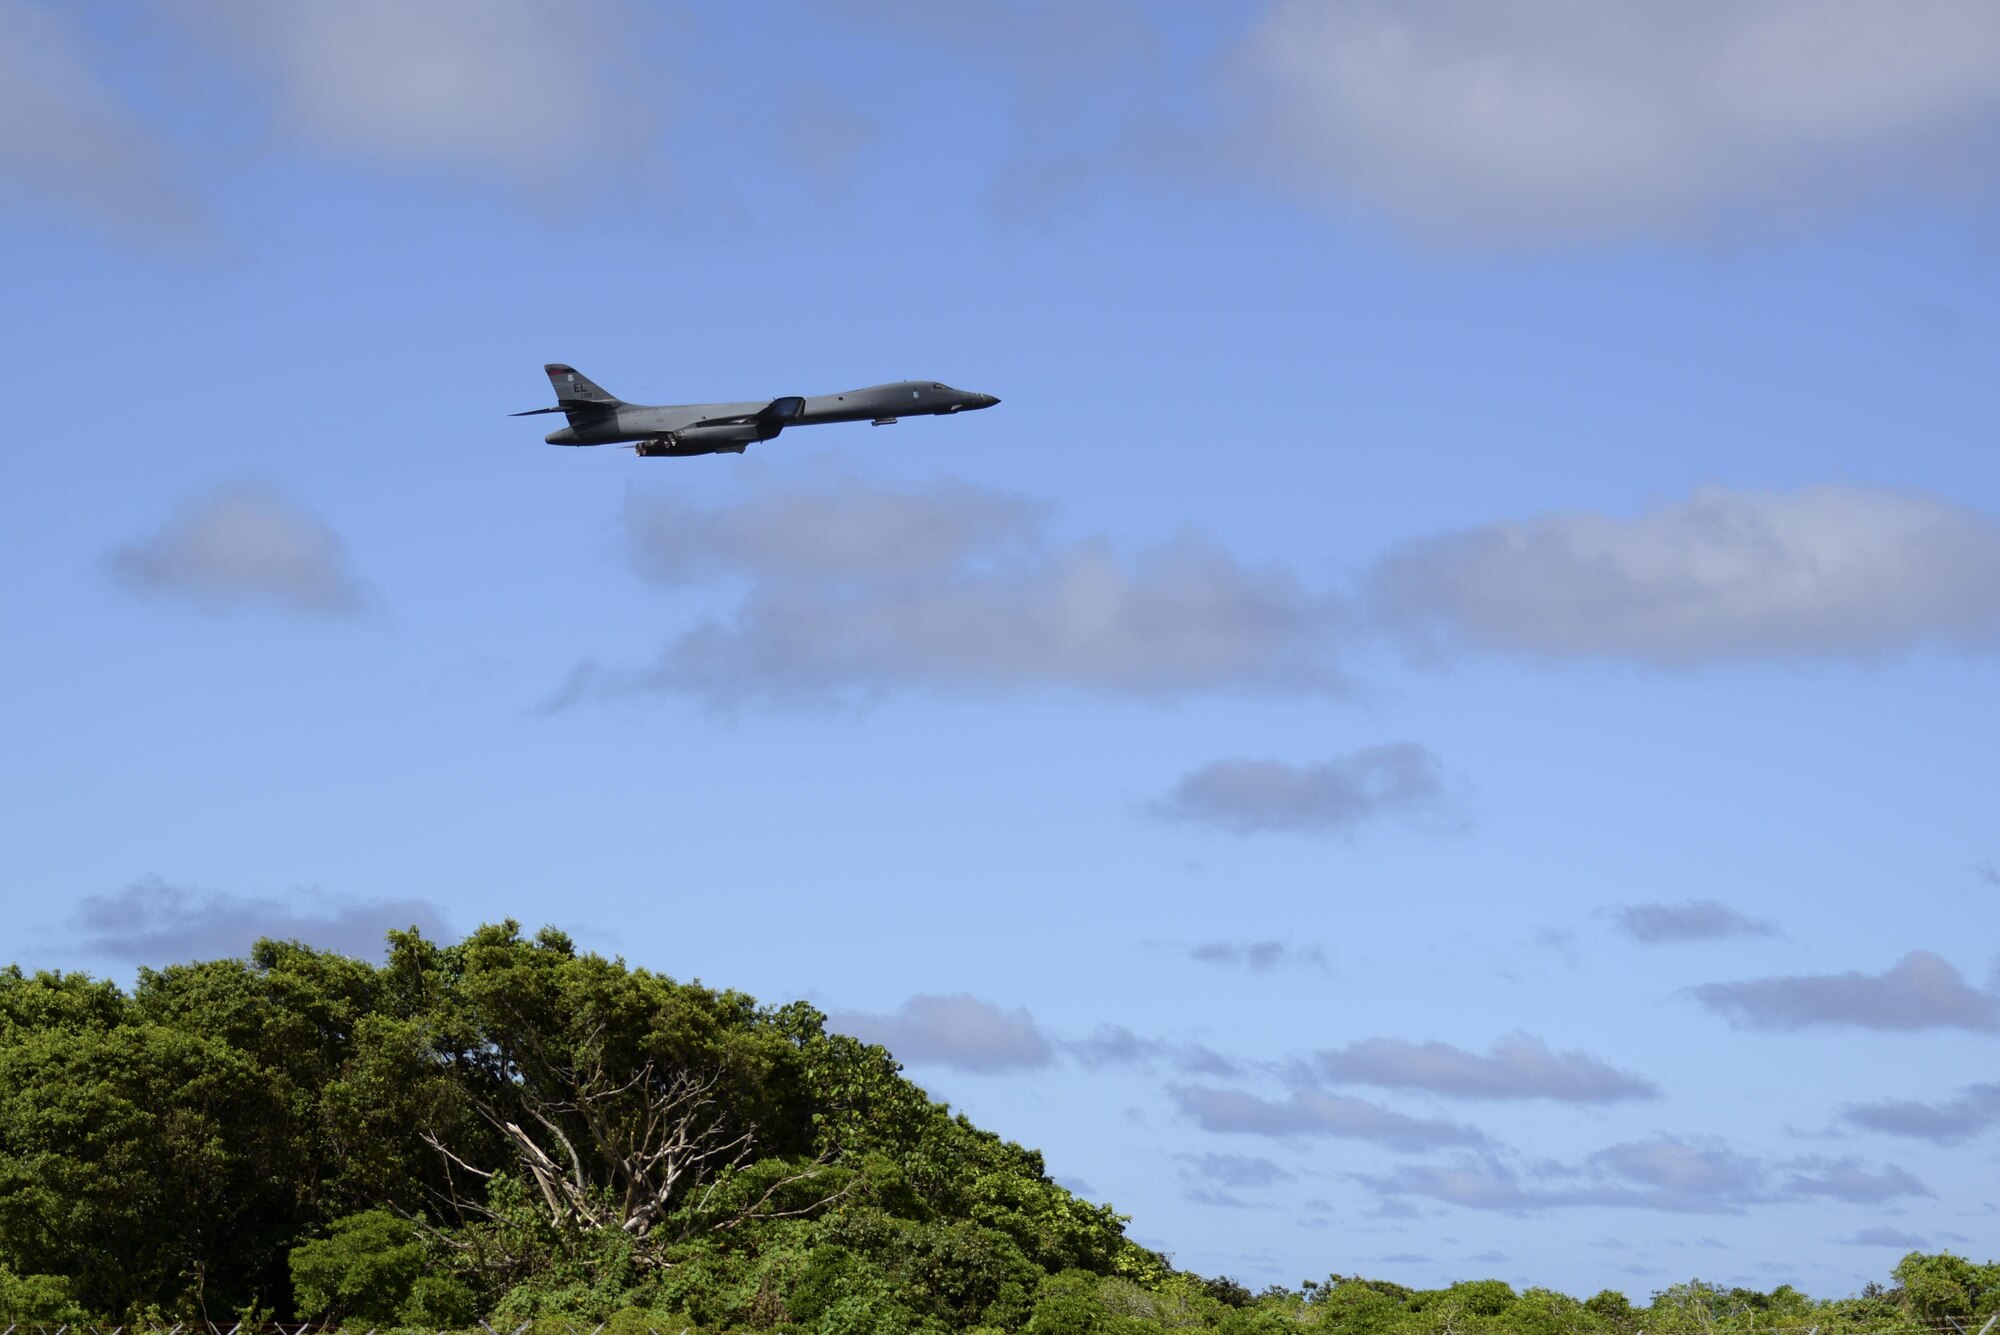 A U.S. Air Force B-1B Lancer assigned to the 37th Expeditionary Bomb Squadron, deployed from Ellsworth Air Force Base, South Dakota, takes off from Andersen AFB, Guam for a mission flying in the Western Pacific, Nov. 13, 2017